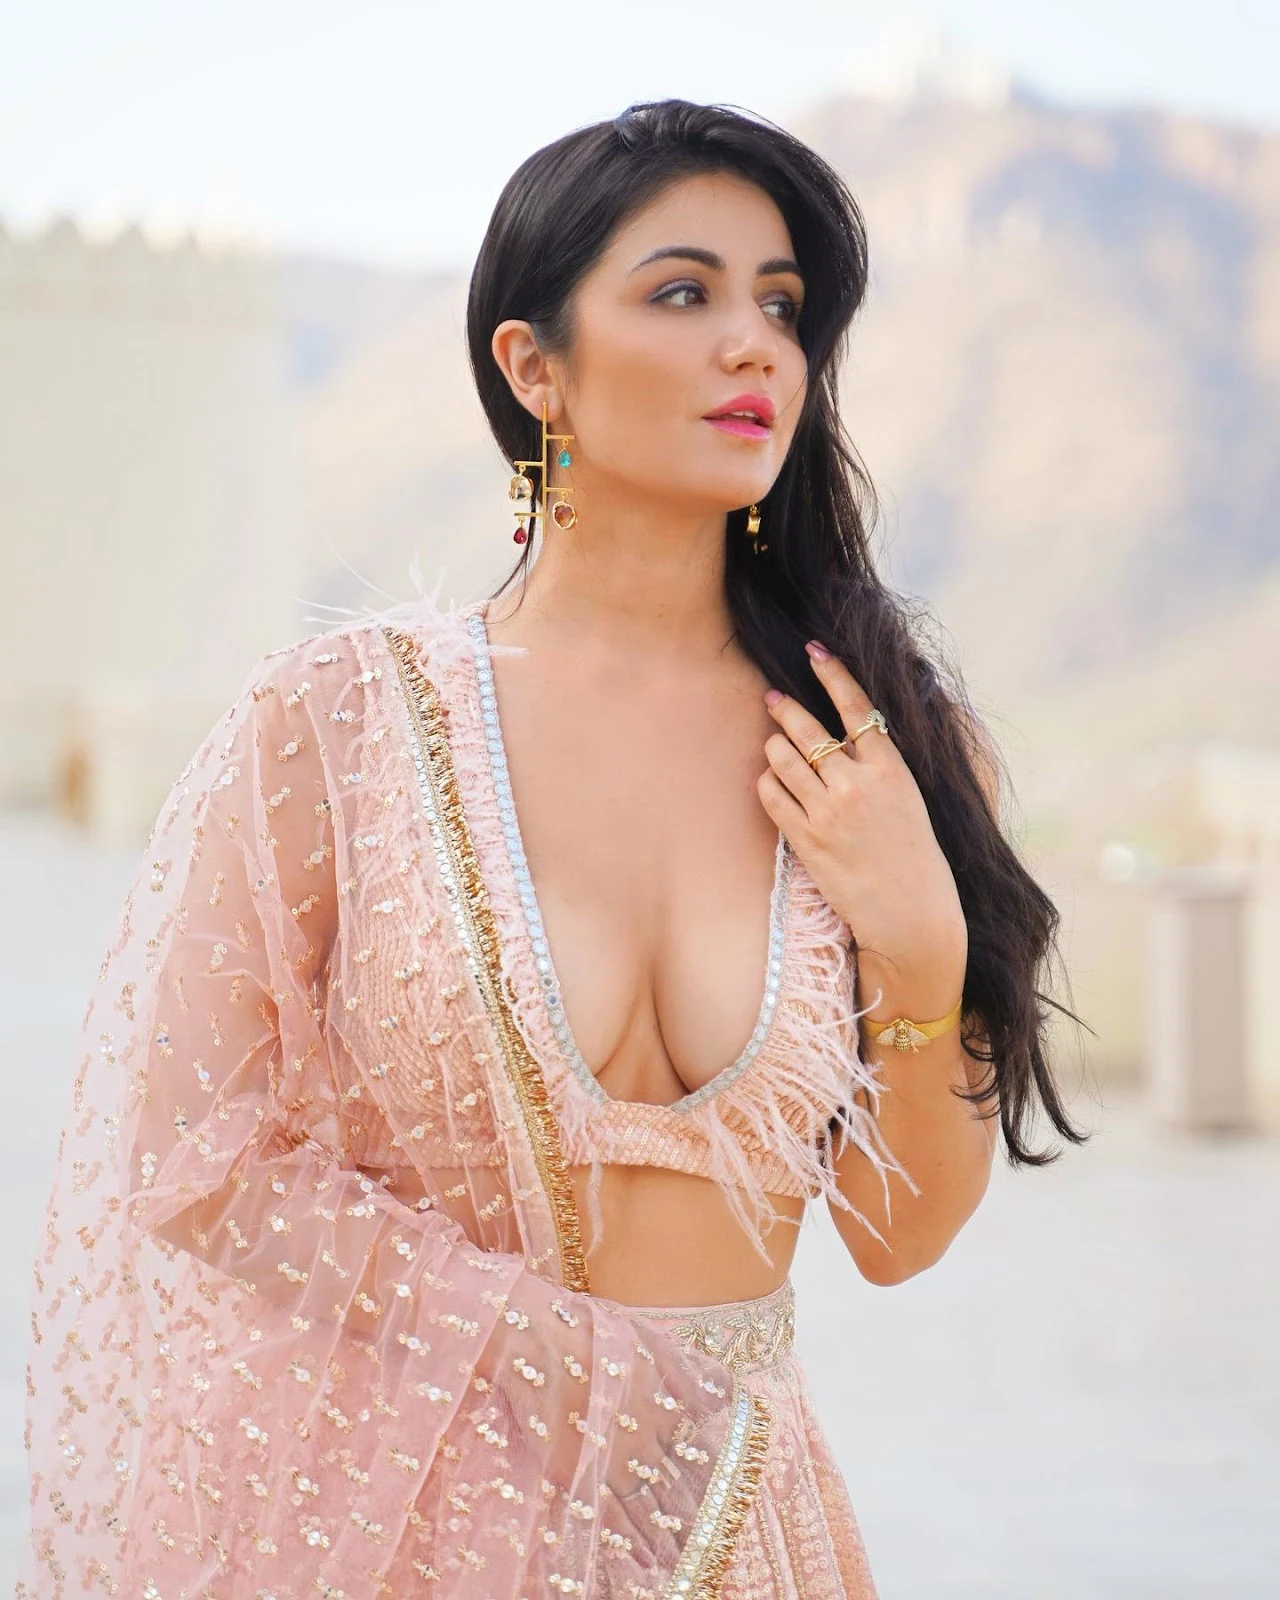 Amy Aela cleavage blouse hot actress dancer